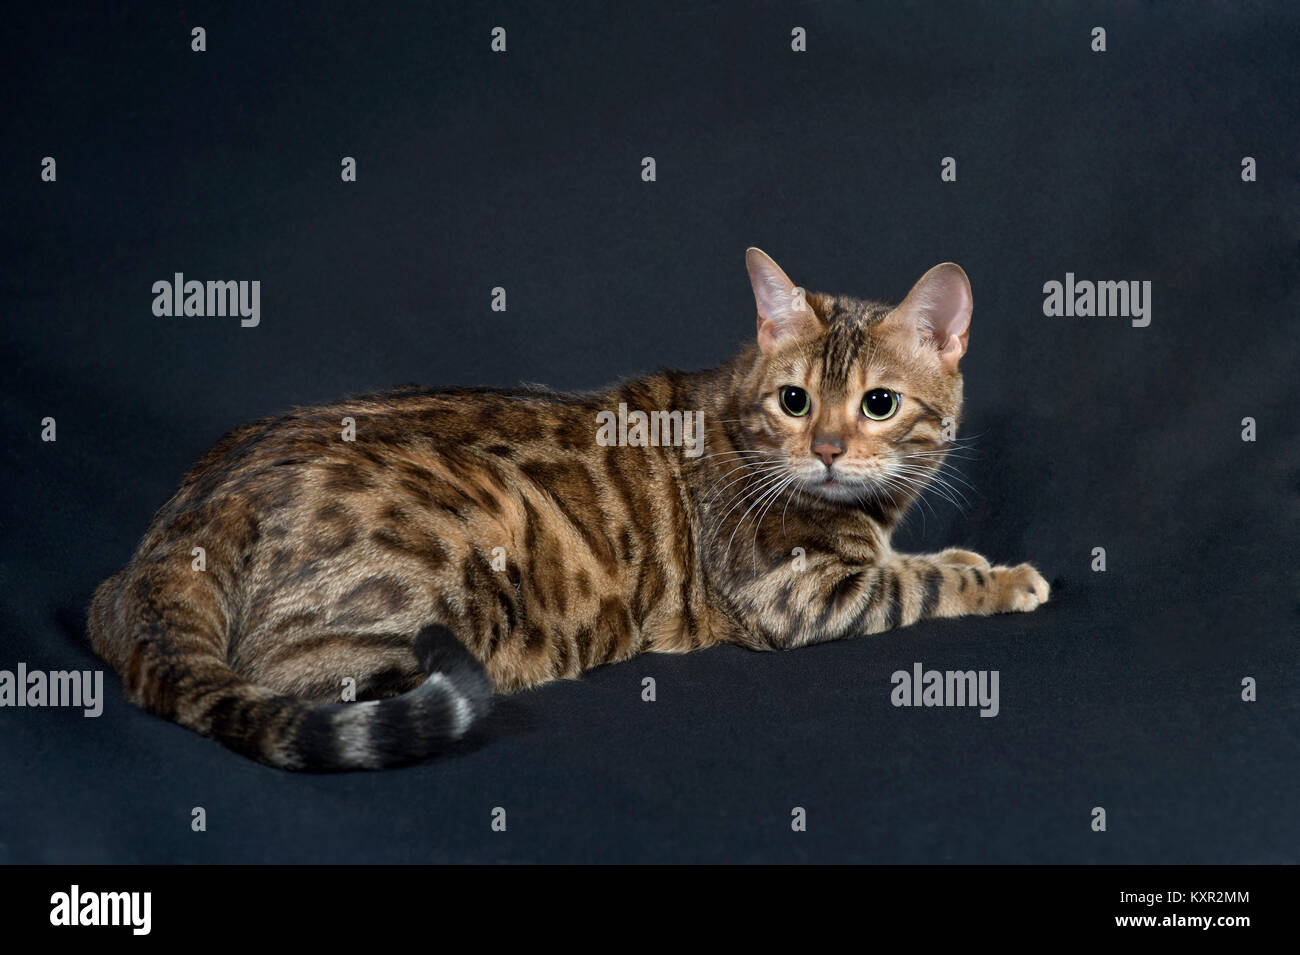 Purebred Bengal cat from Pixel Perfect Cats cattery, sitting on a black backdrop looking behind showing off her spots. Stock Photo